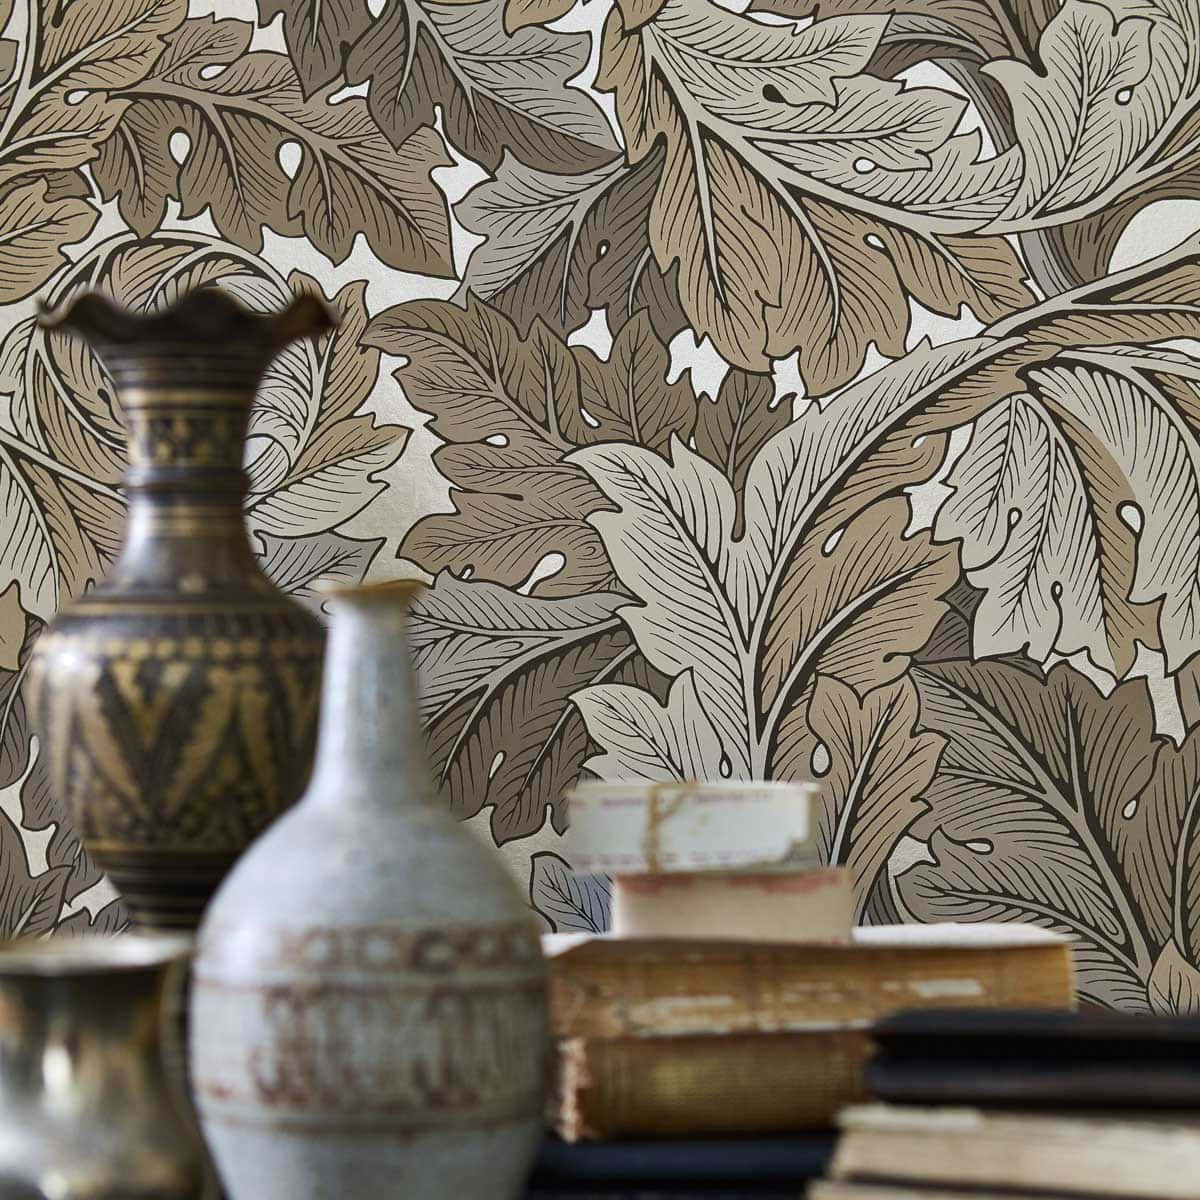 Wall Motif With Multifaceted Foliage Wallpaper